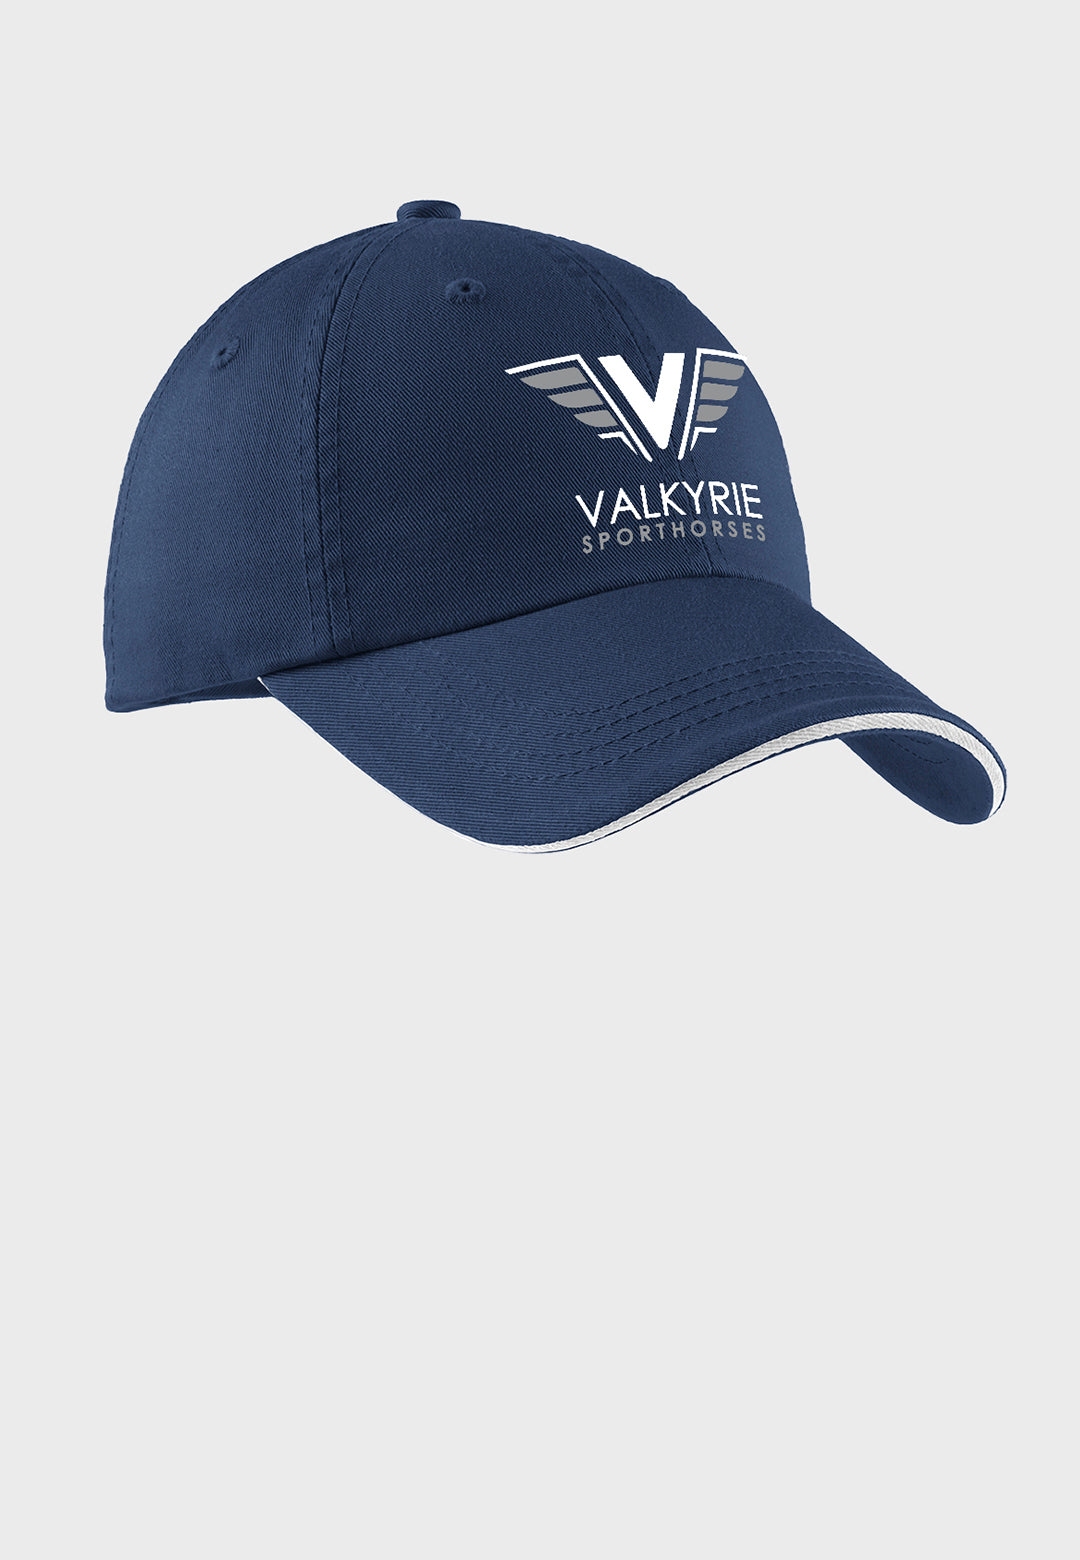 Valkyrie Sporthorses Port Authority® Sandwich Bill Cap with Striped Closure